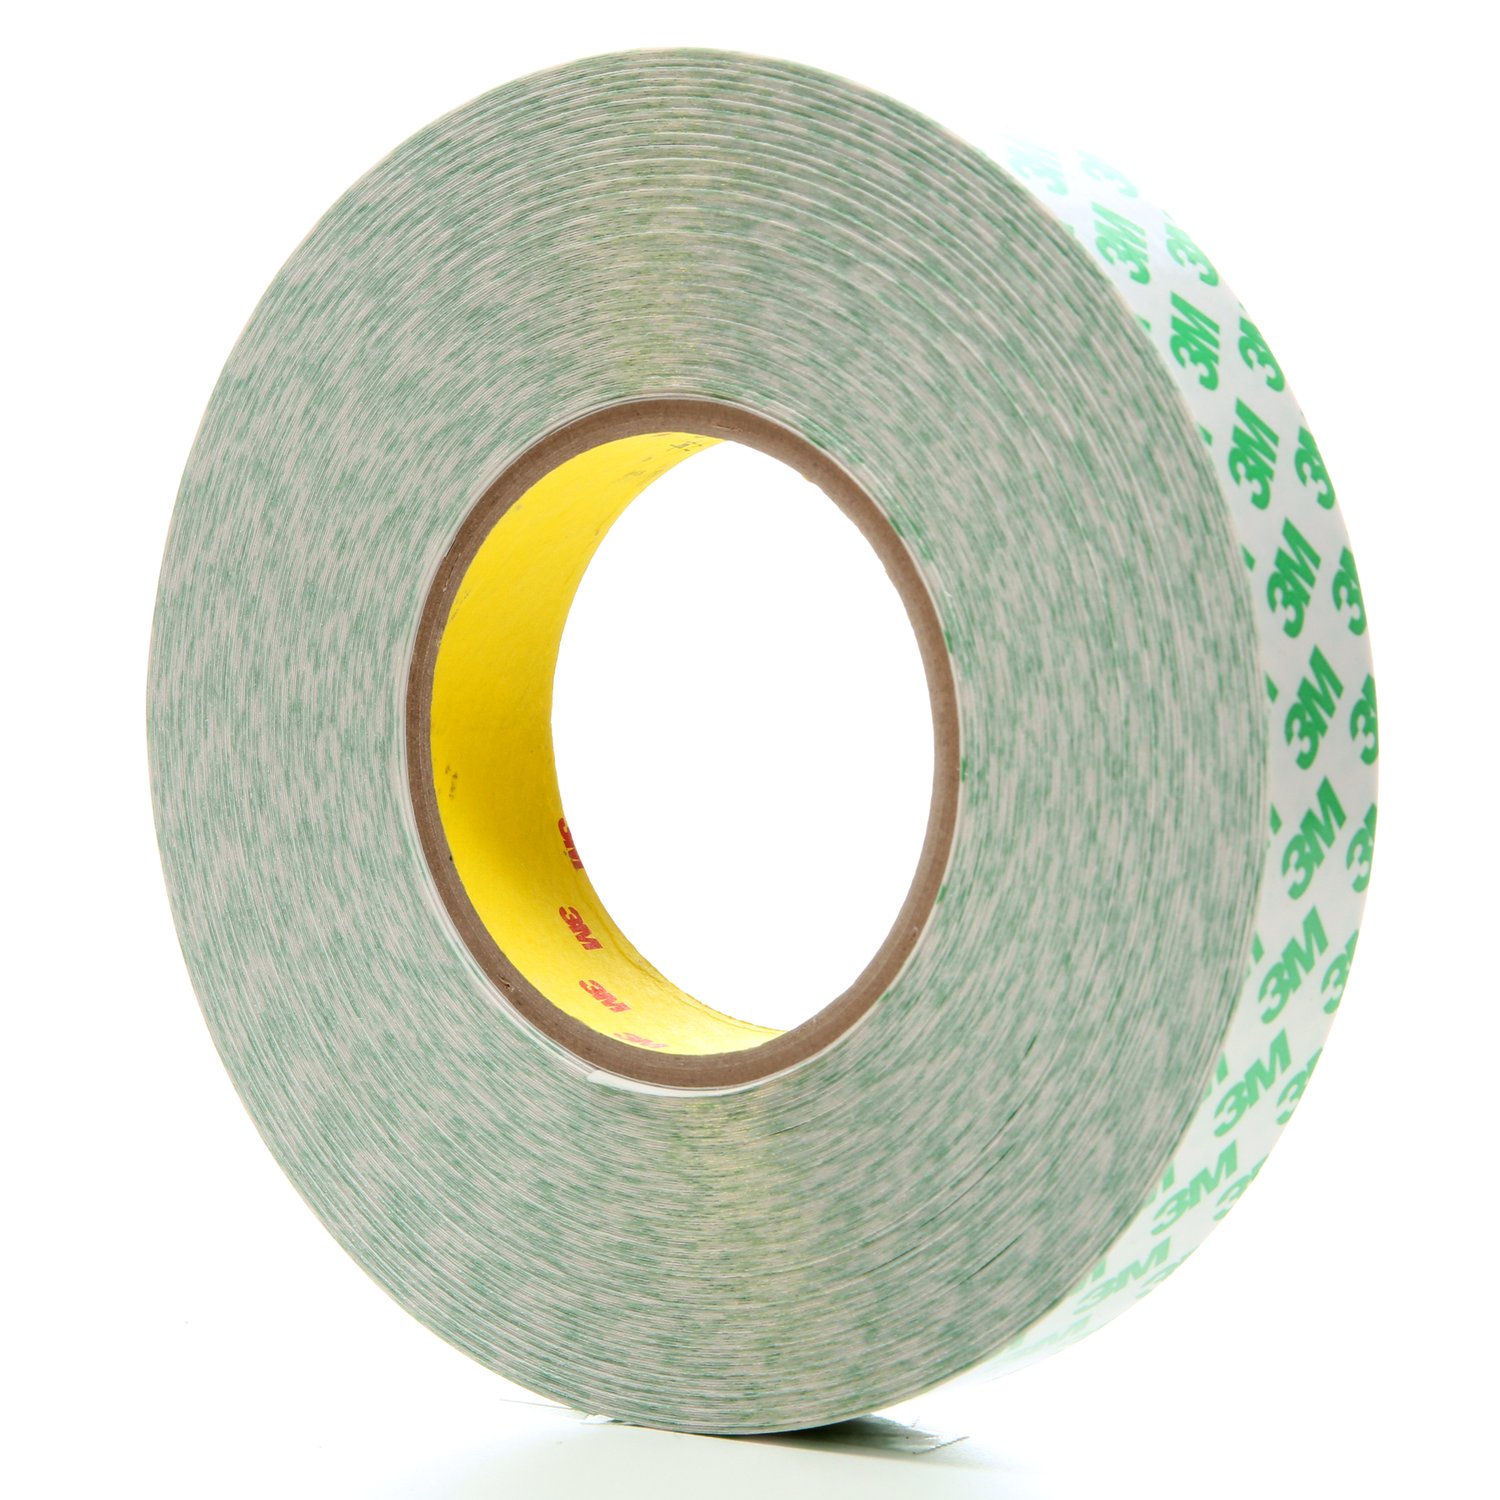 7000124692 - 3M High Performance Double Coated Tape 9087, White, 1 in x 55 yd, 10.1
mil, 18 rolls per case